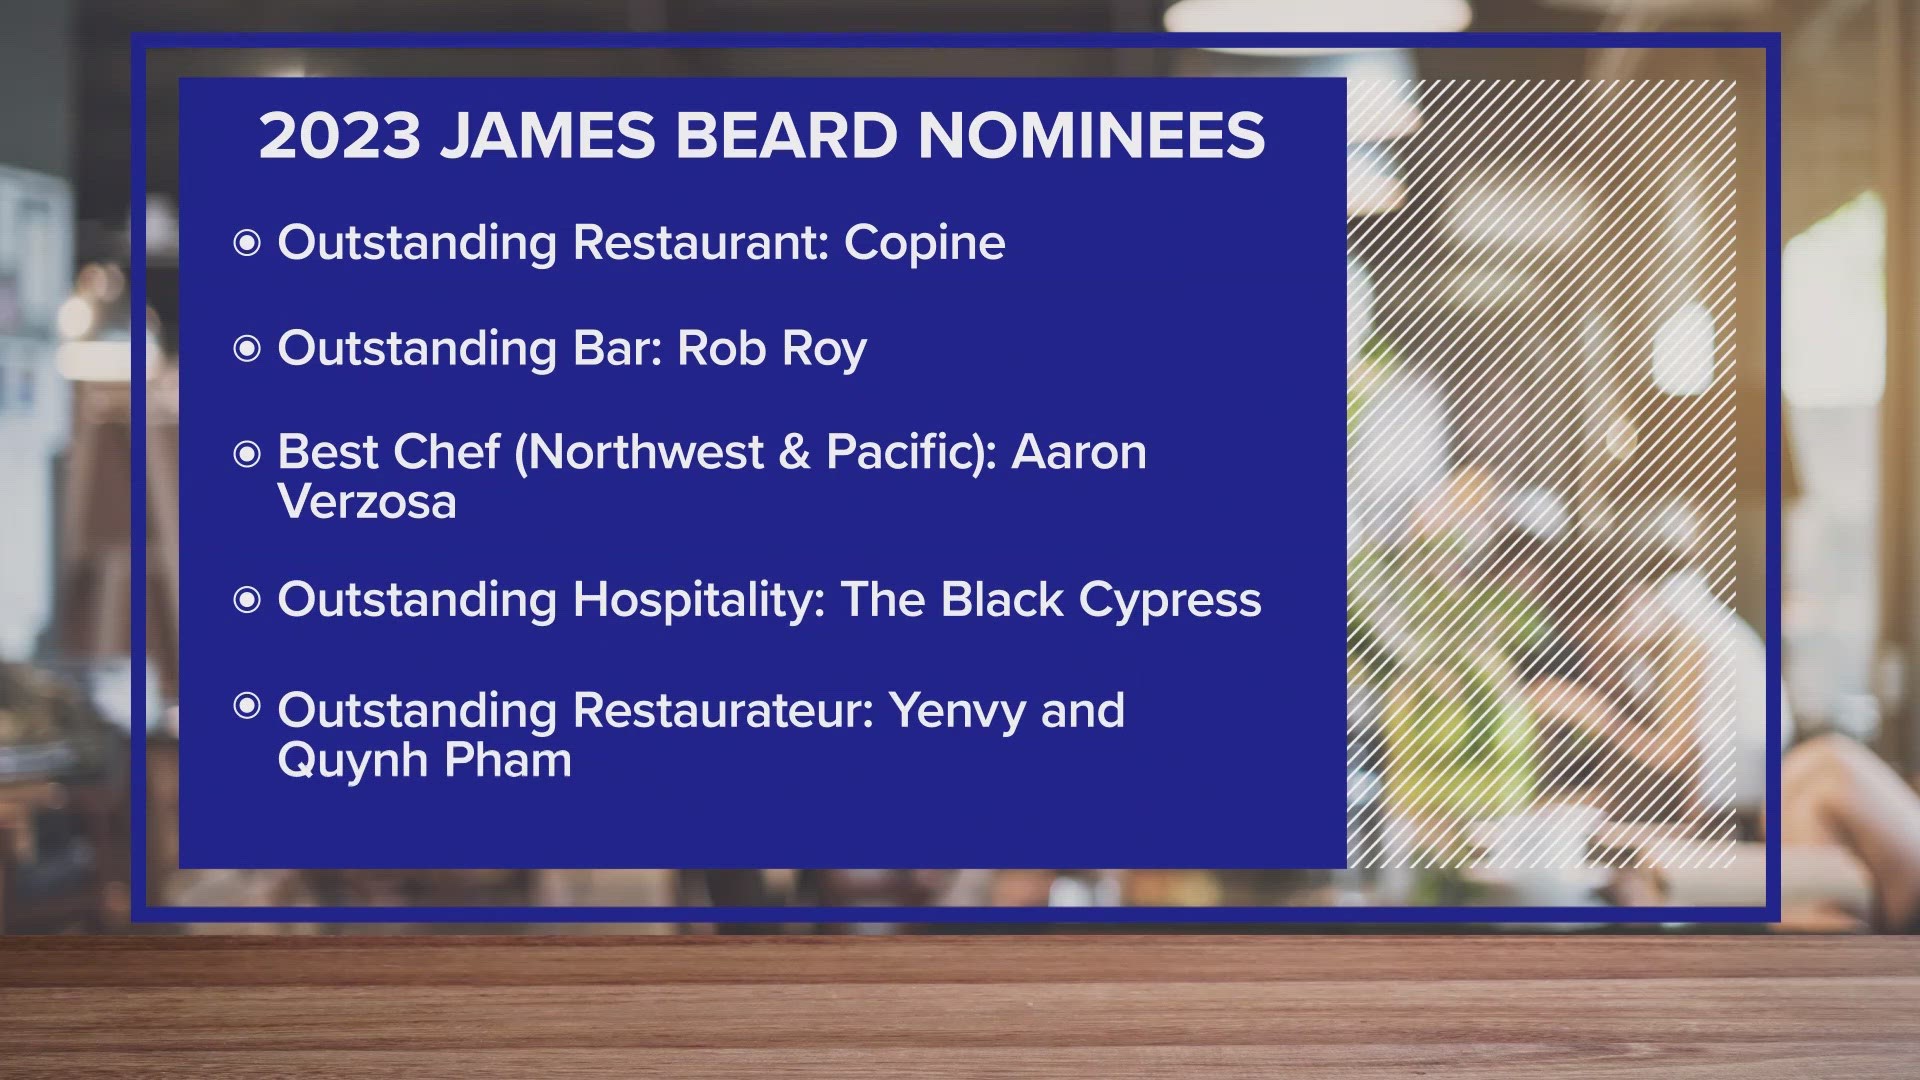 The list of nominees for restaurant and chef, and the Leadership Award winners have been released.